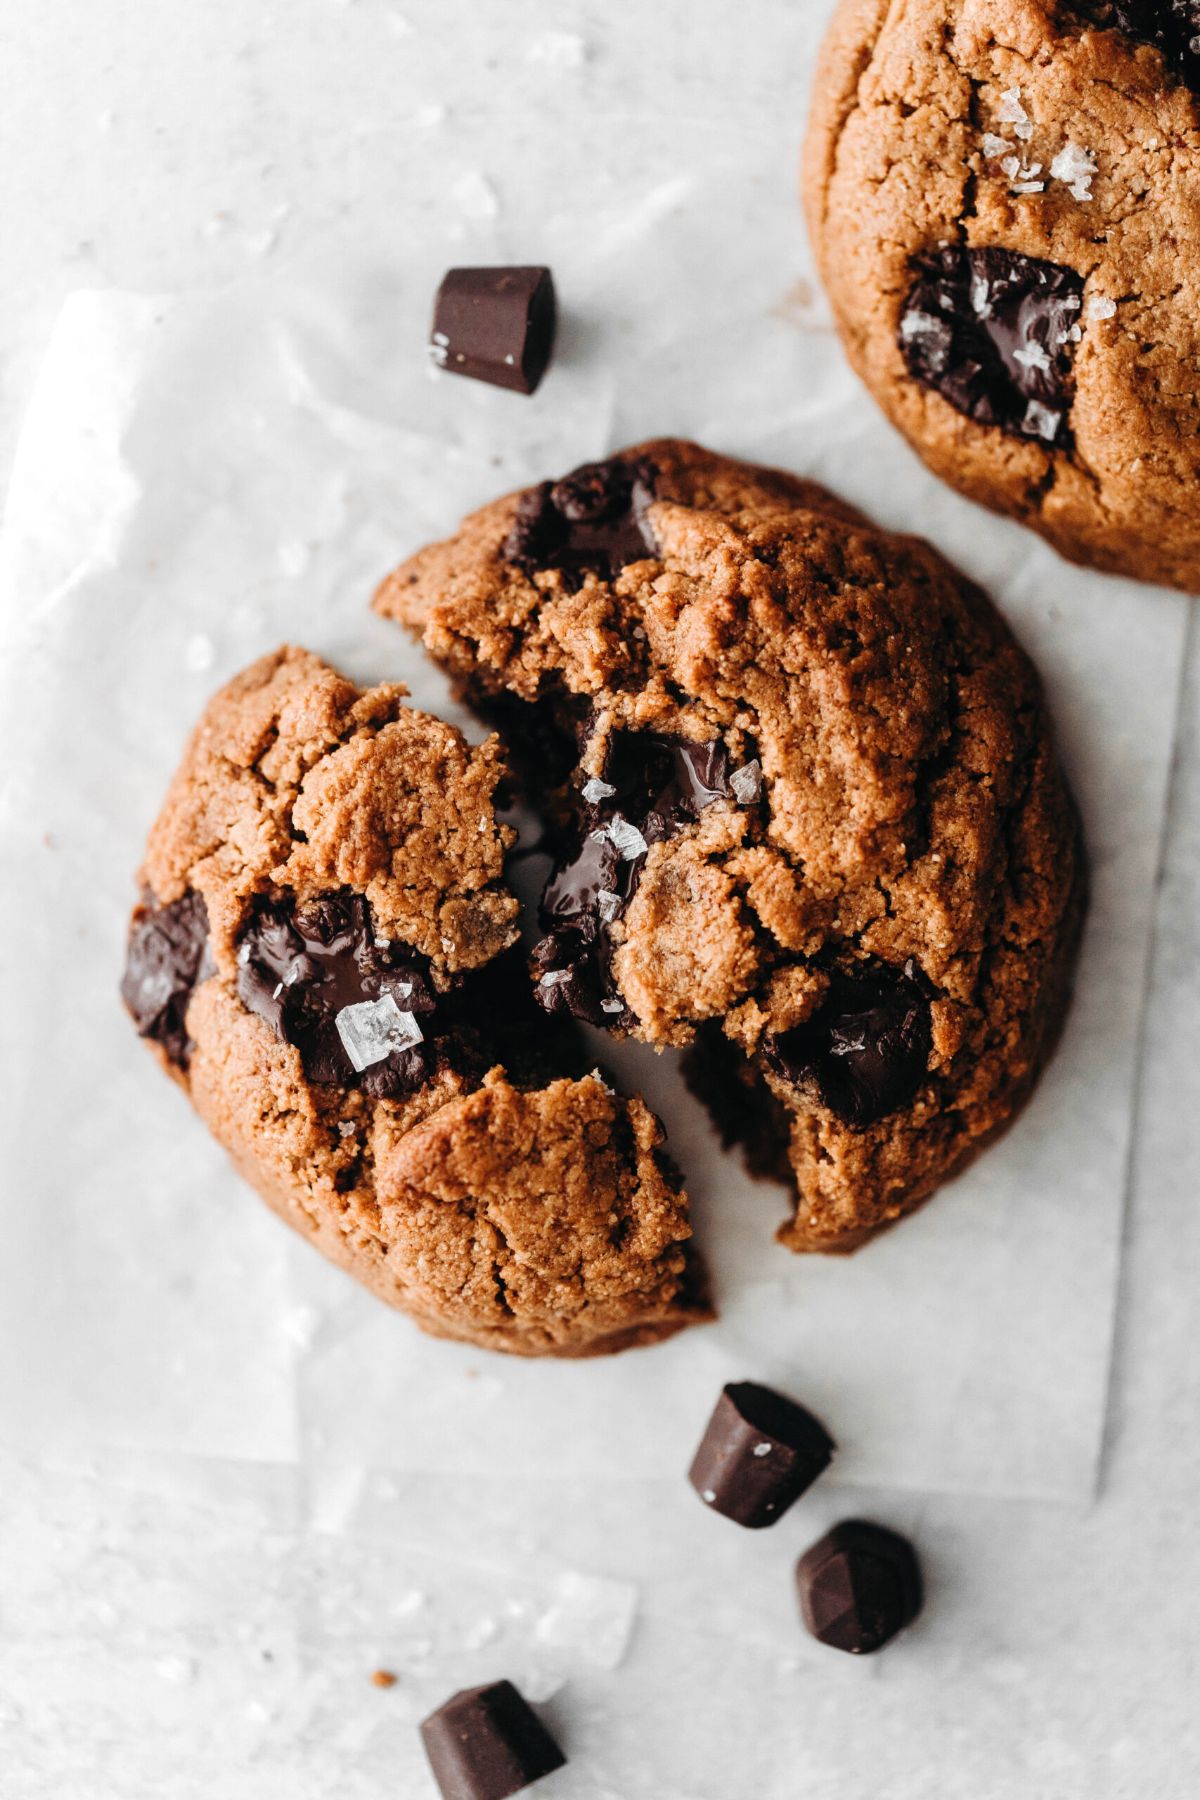 a vegan chocolate chip cookie broken in half, with chocolate chips scattered around